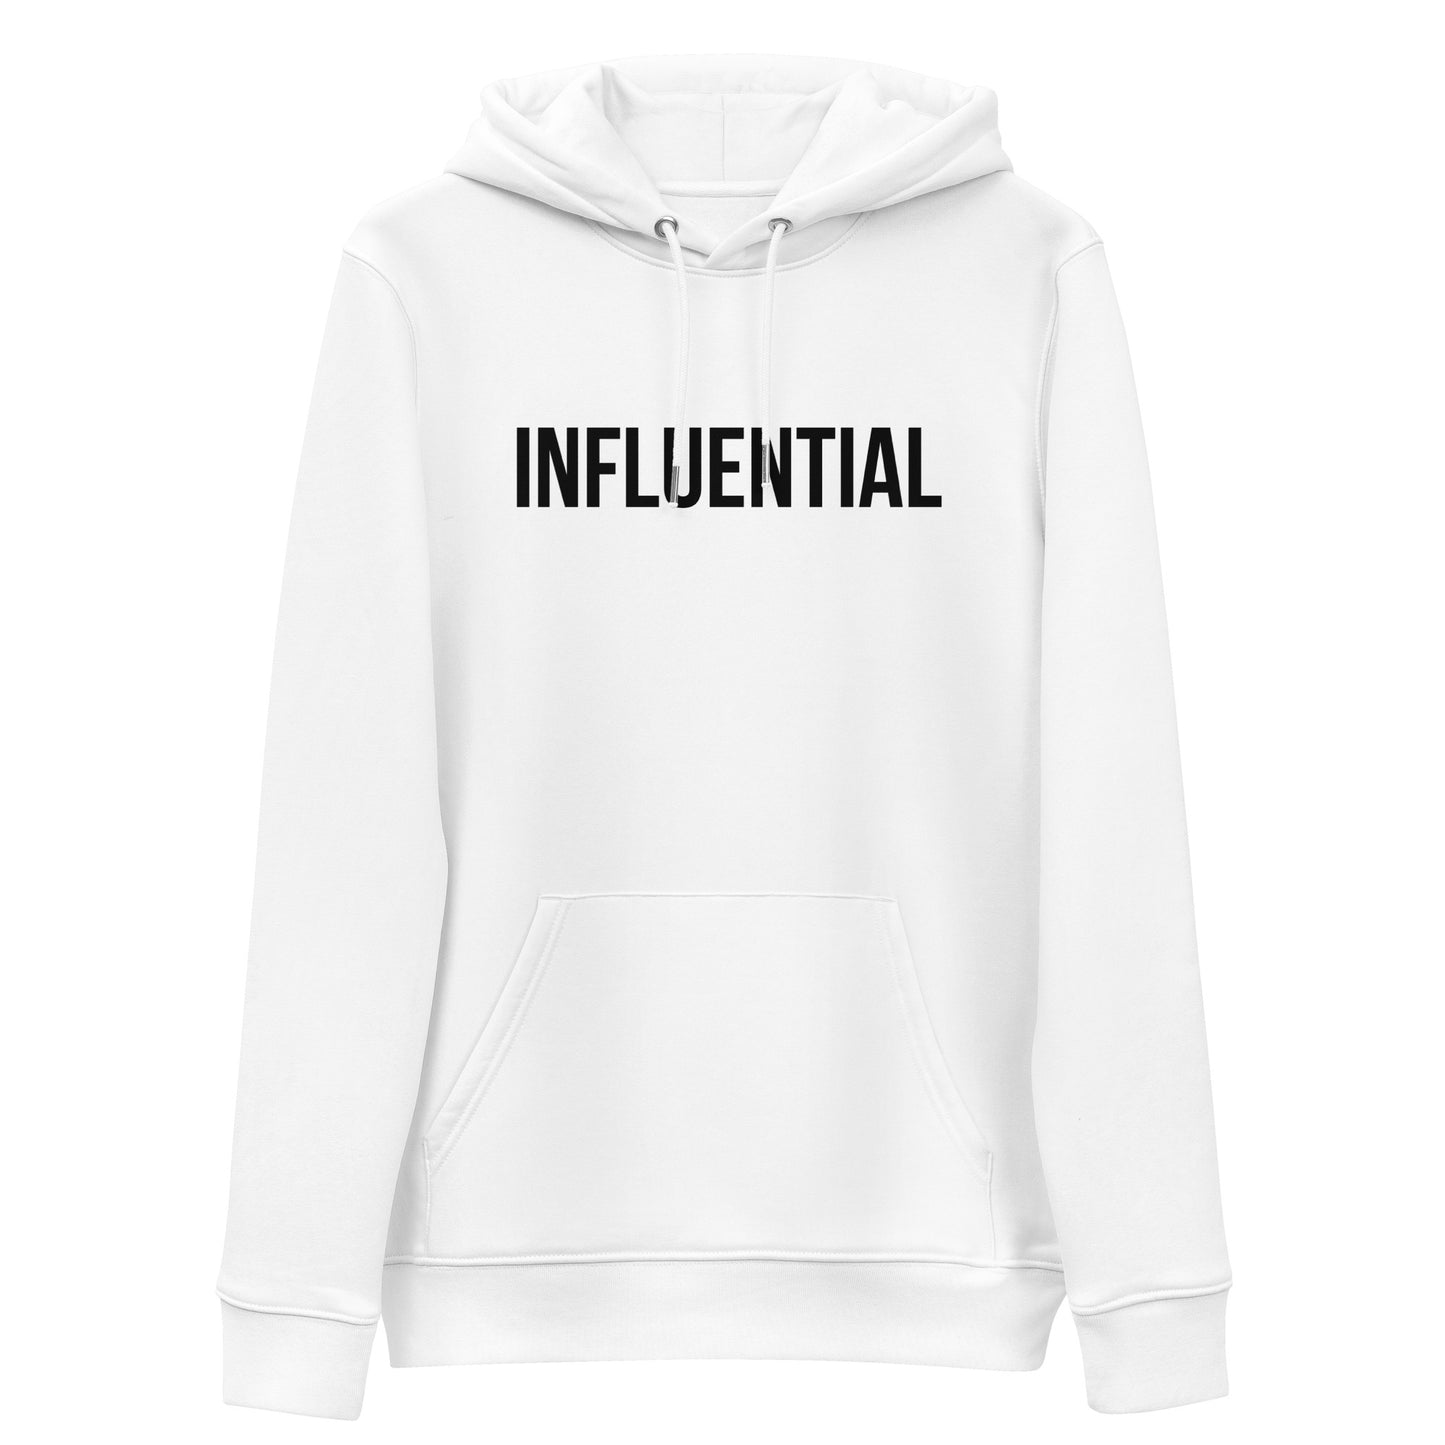 Tribe (INFLUENTIAL) Unisex essential eco hoodie (Black Text)